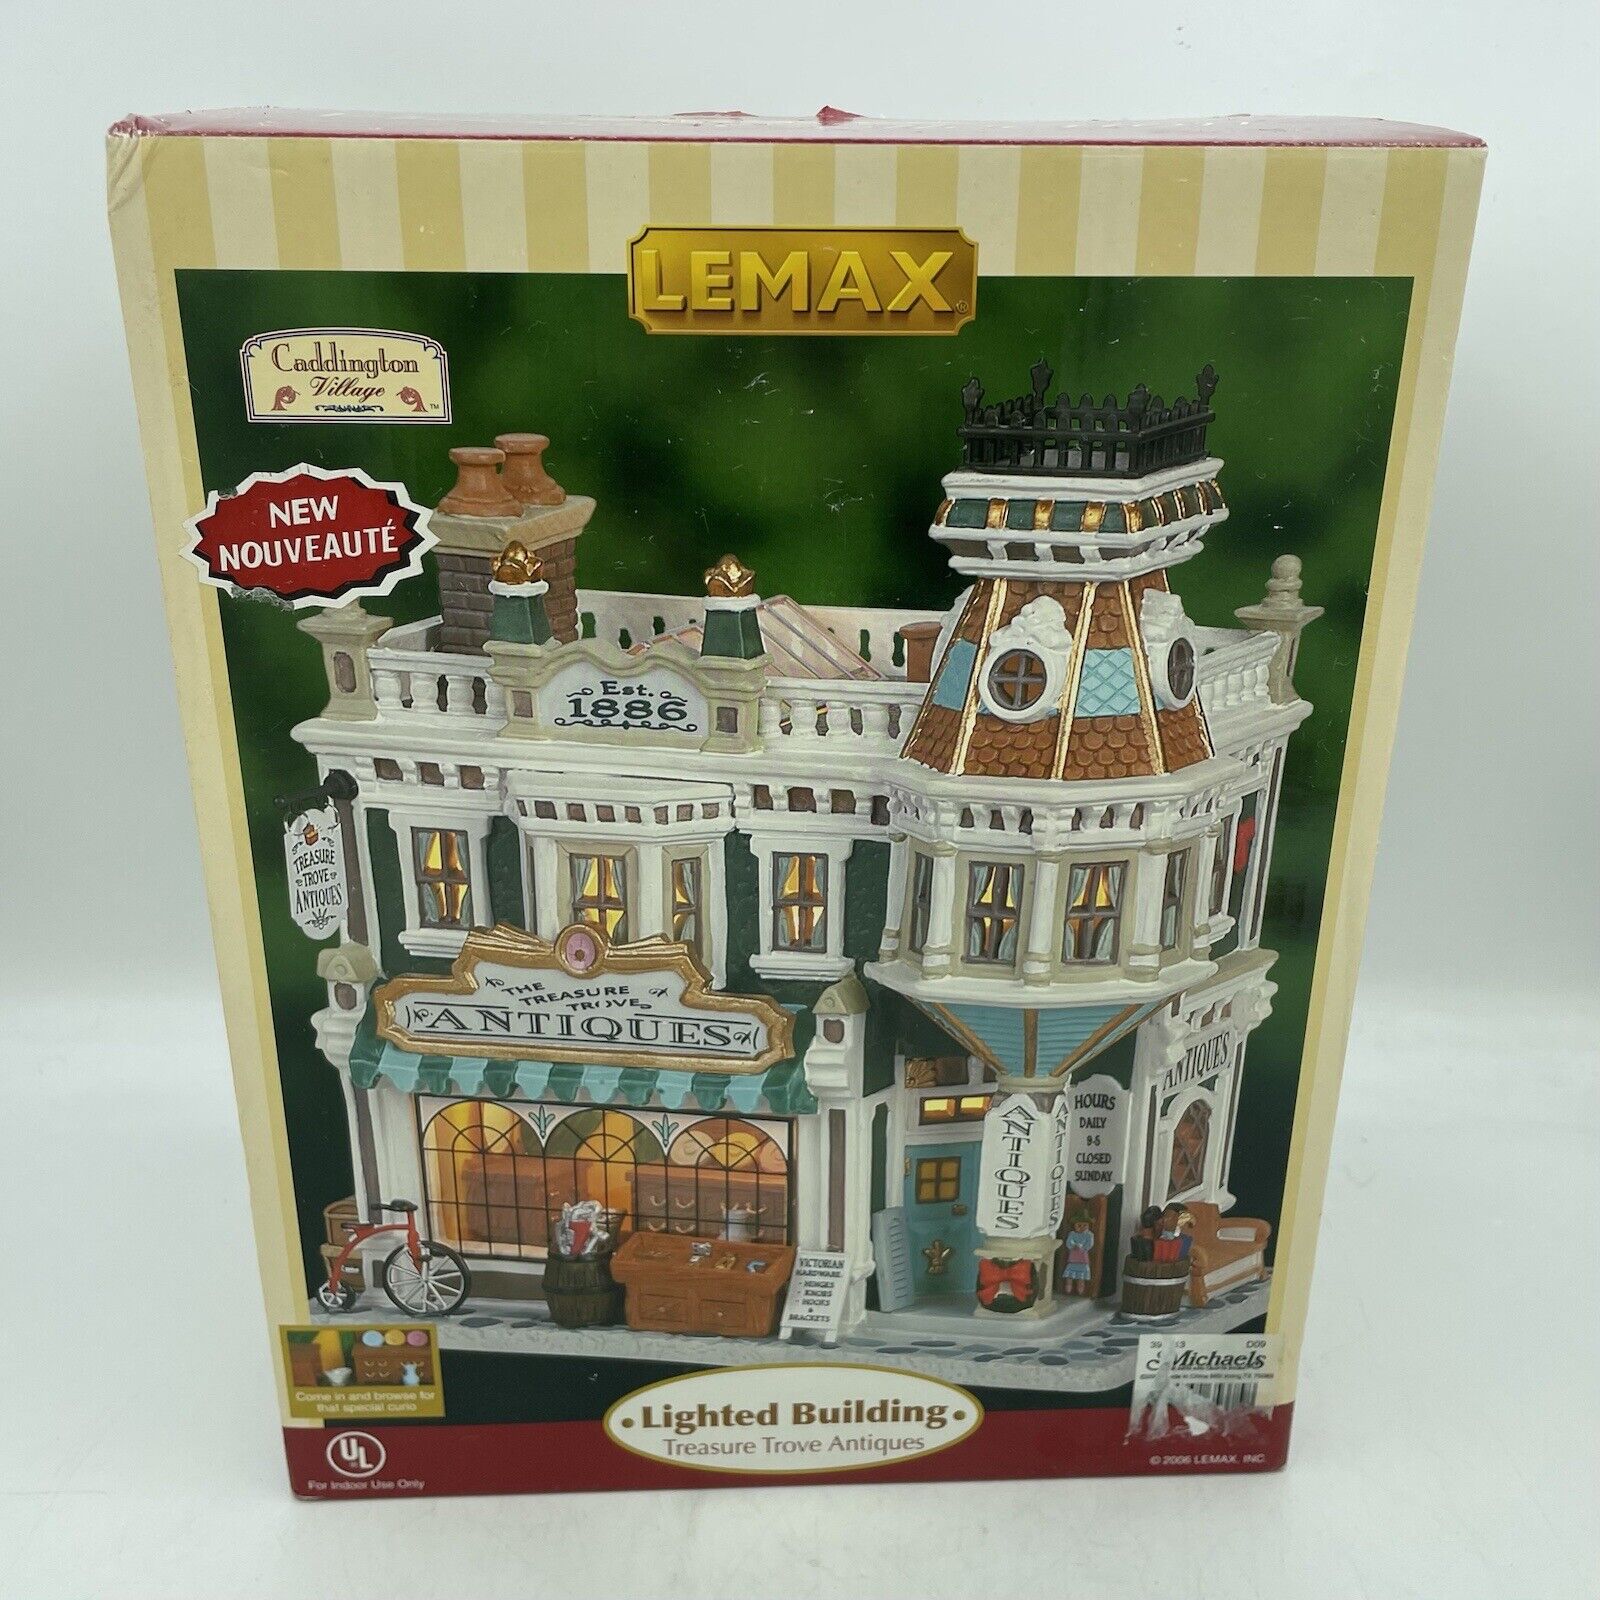 2006 Lemax Treasure Trove Antiques Lighted House Christmas Village NEW Open Box